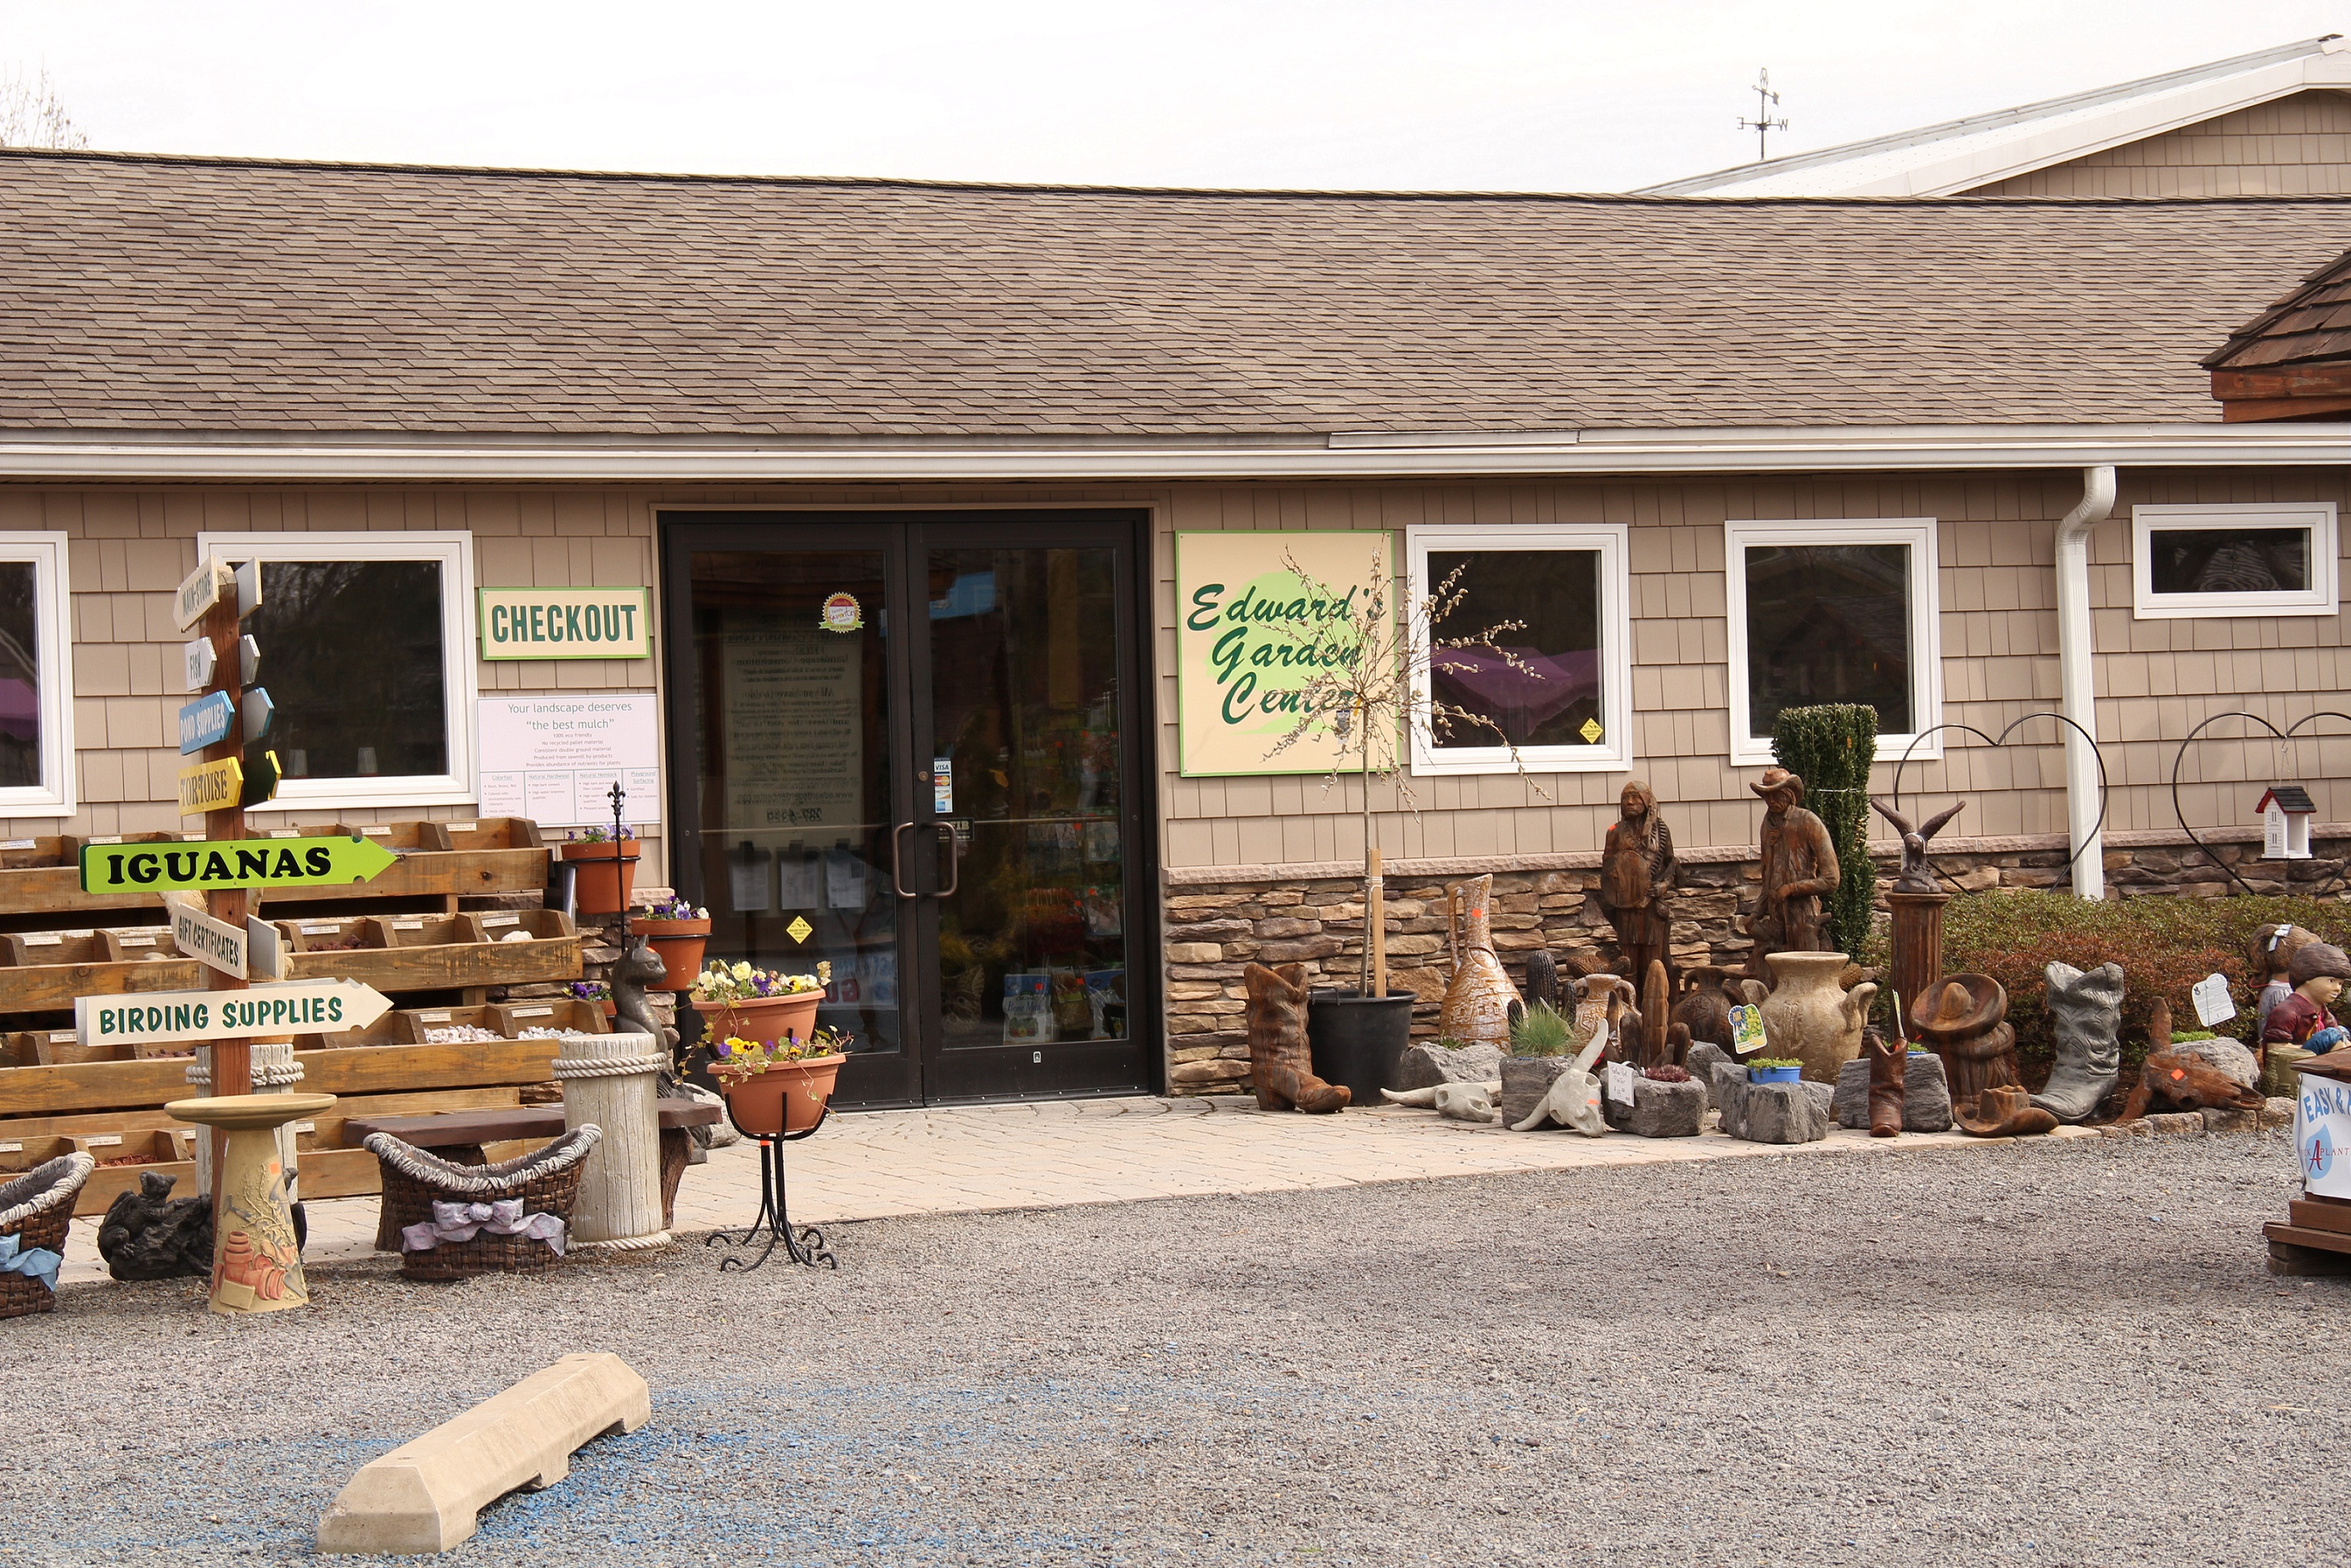 Stop by Edward's Garden Center in Forty Fort